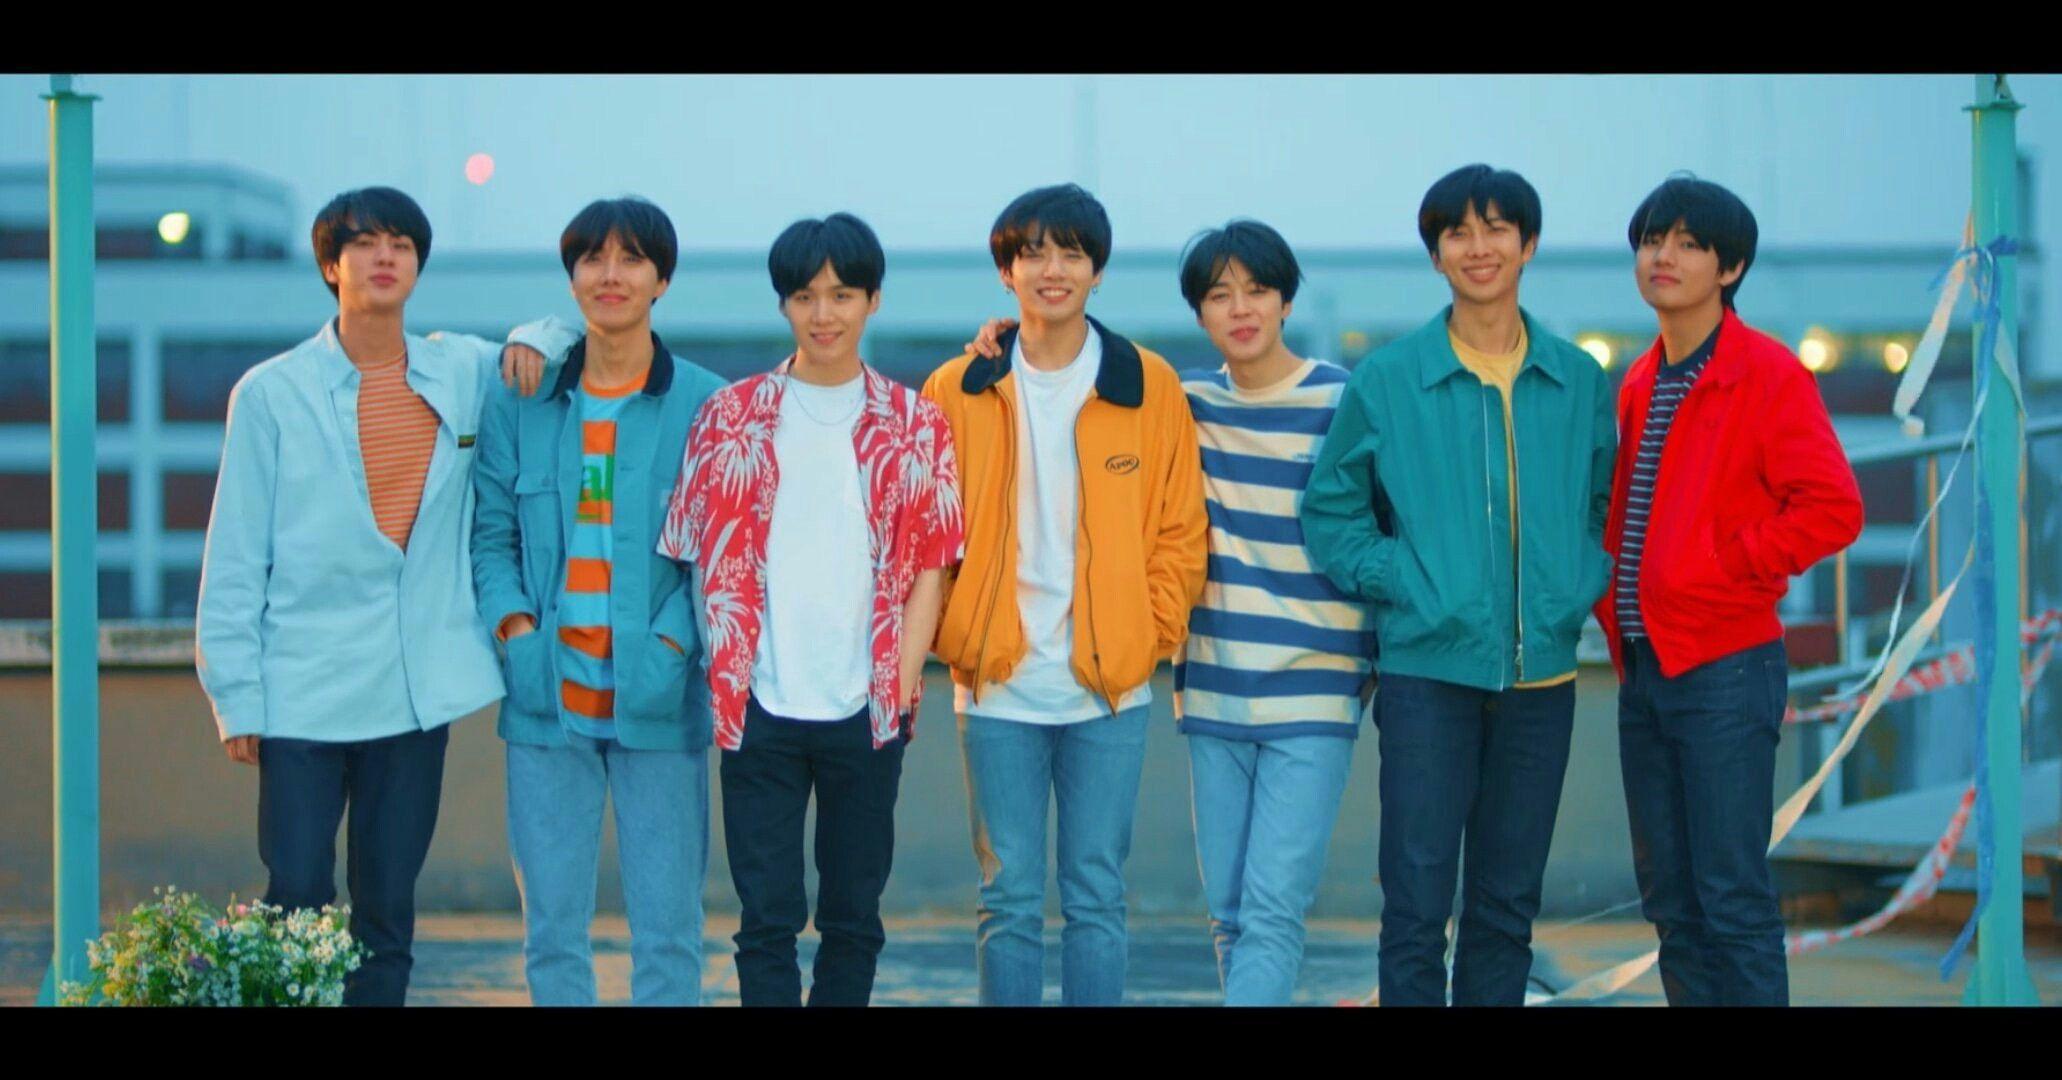 Featured image of post Bts Euphoria Desktop Wallpaper Hd Select your favorite images and download them for use as wallpaper for your desktop or phone